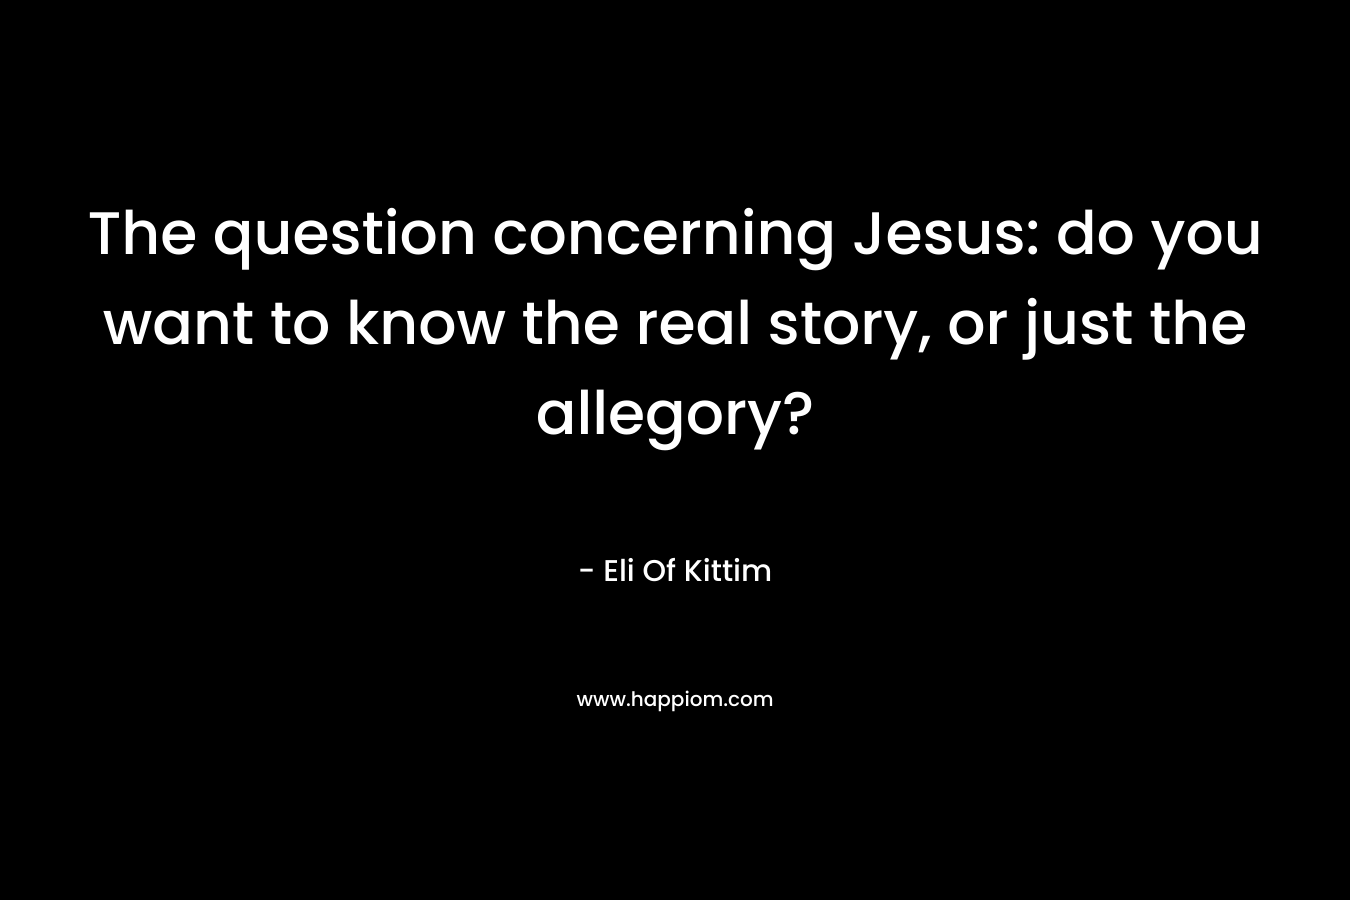 The question concerning Jesus: do you want to know the real story, or just the allegory? – Eli Of Kittim